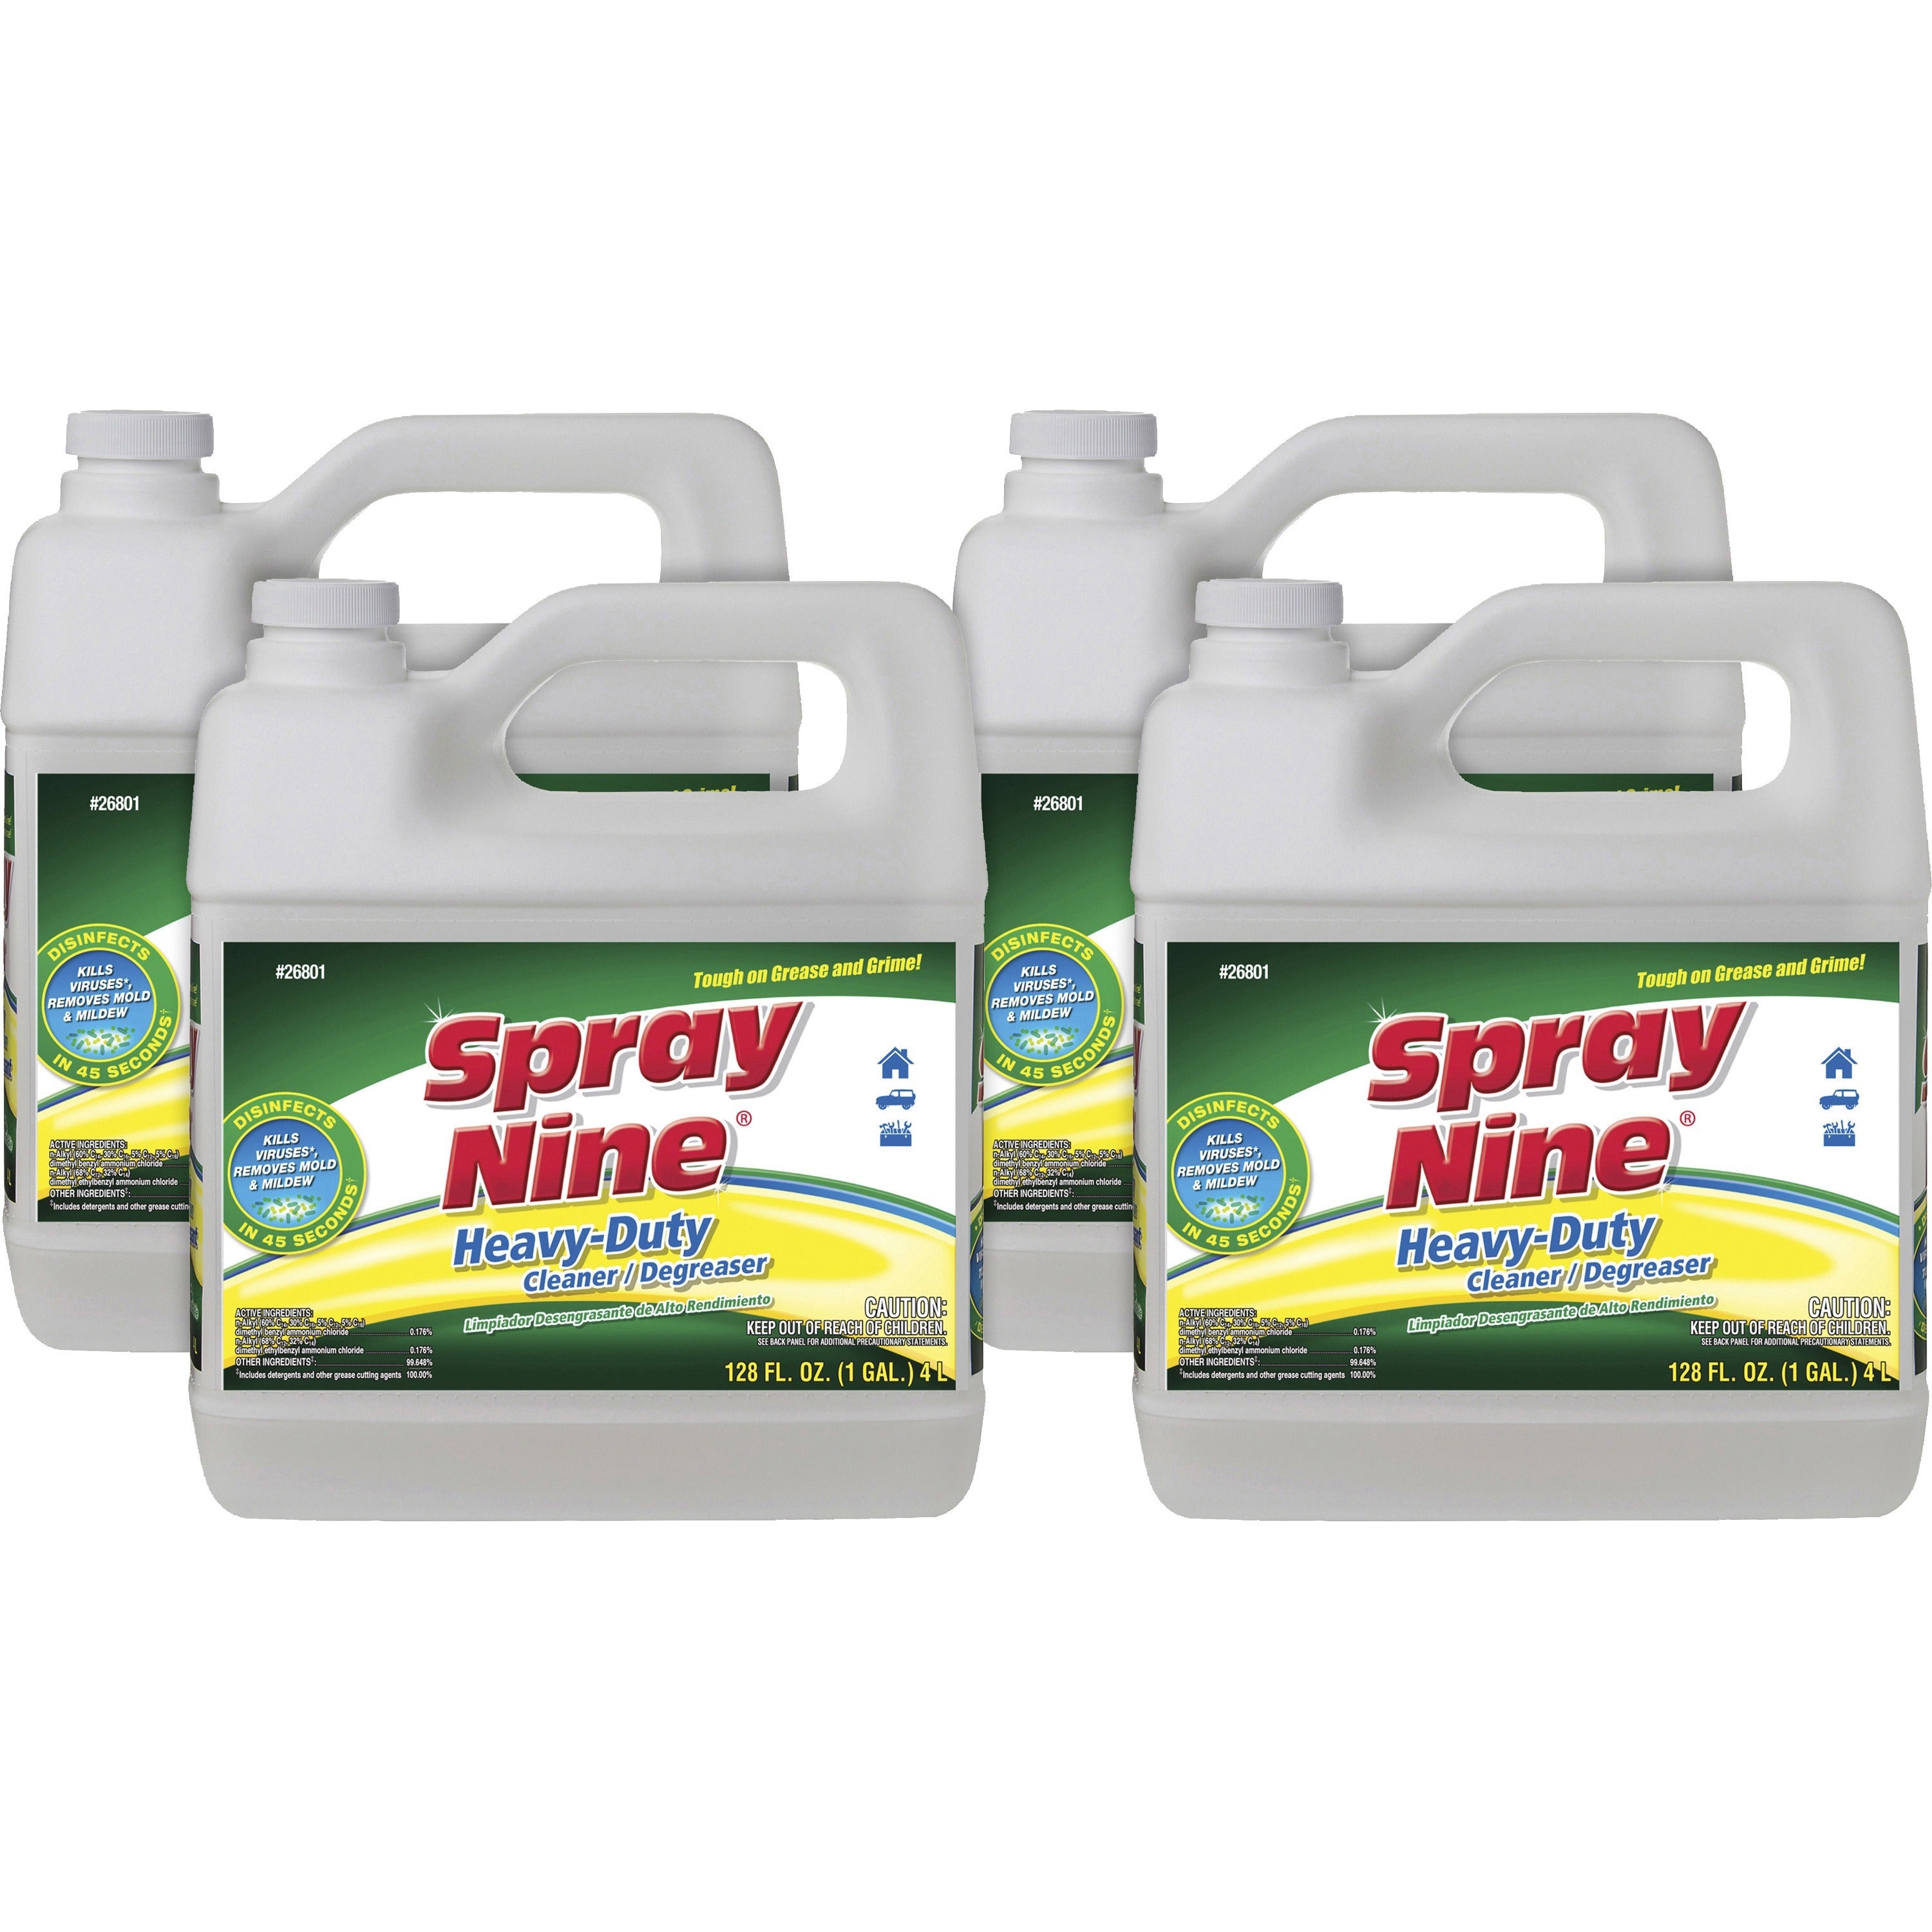 spray-nine-heavy-duty-cleaner-degreaser-w-disinfectant-for-multi-surface-128-fl-oz-4-quart-4-carton-disinfectant-clear_ptx26801ct - 1